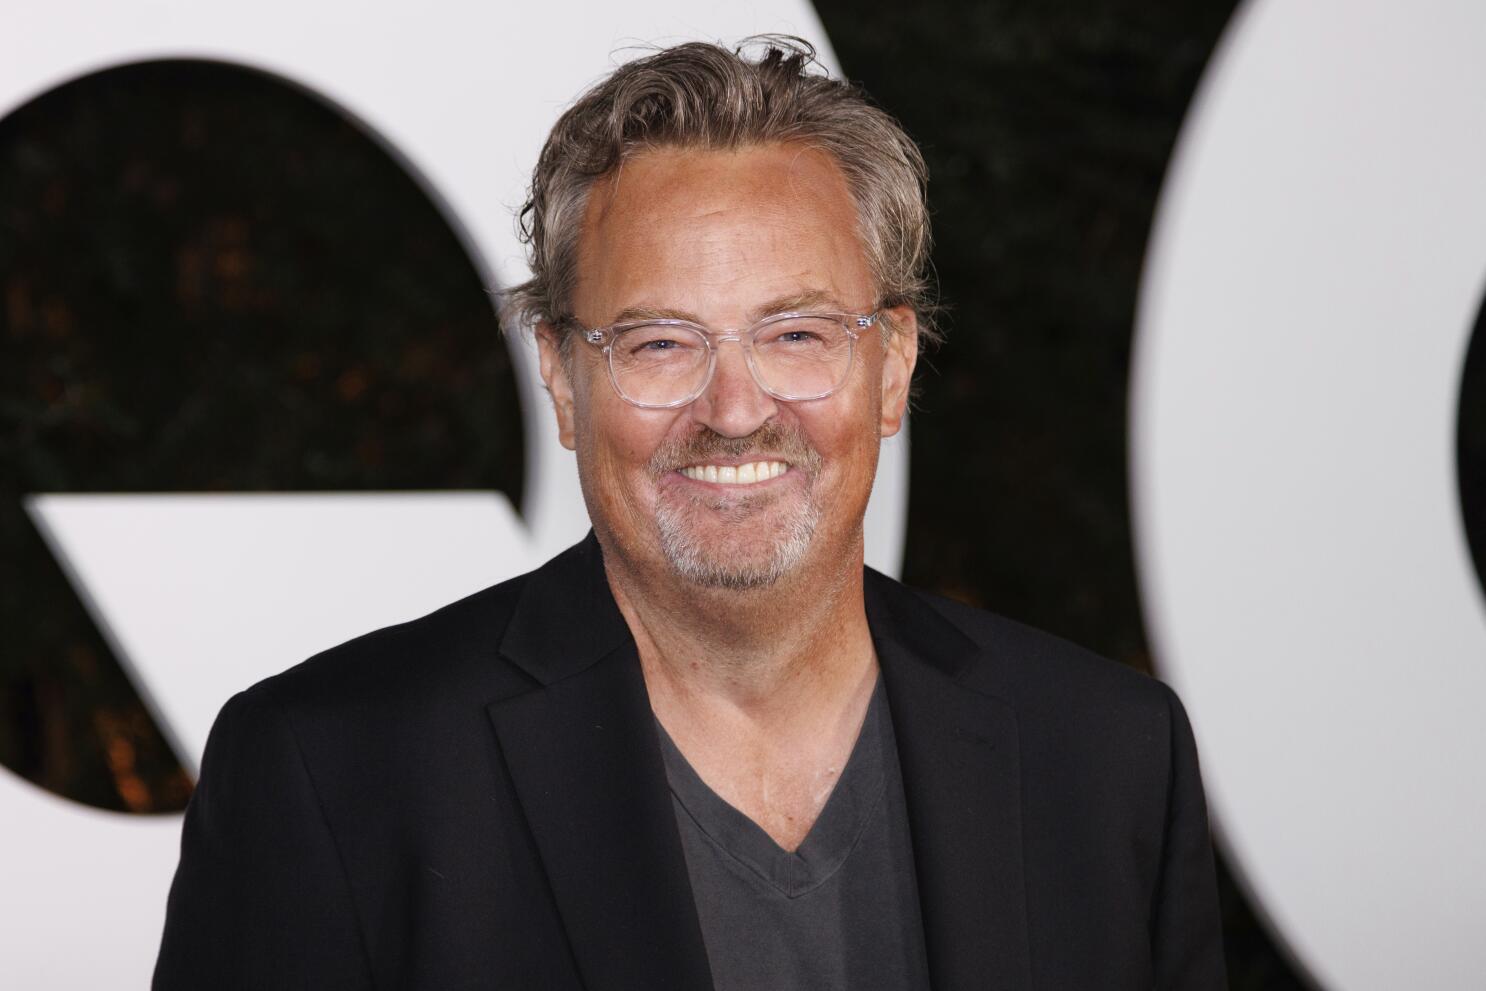 Matthew Perry dead: Celebrities react to 'Friends' star's death - Los Angeles Times